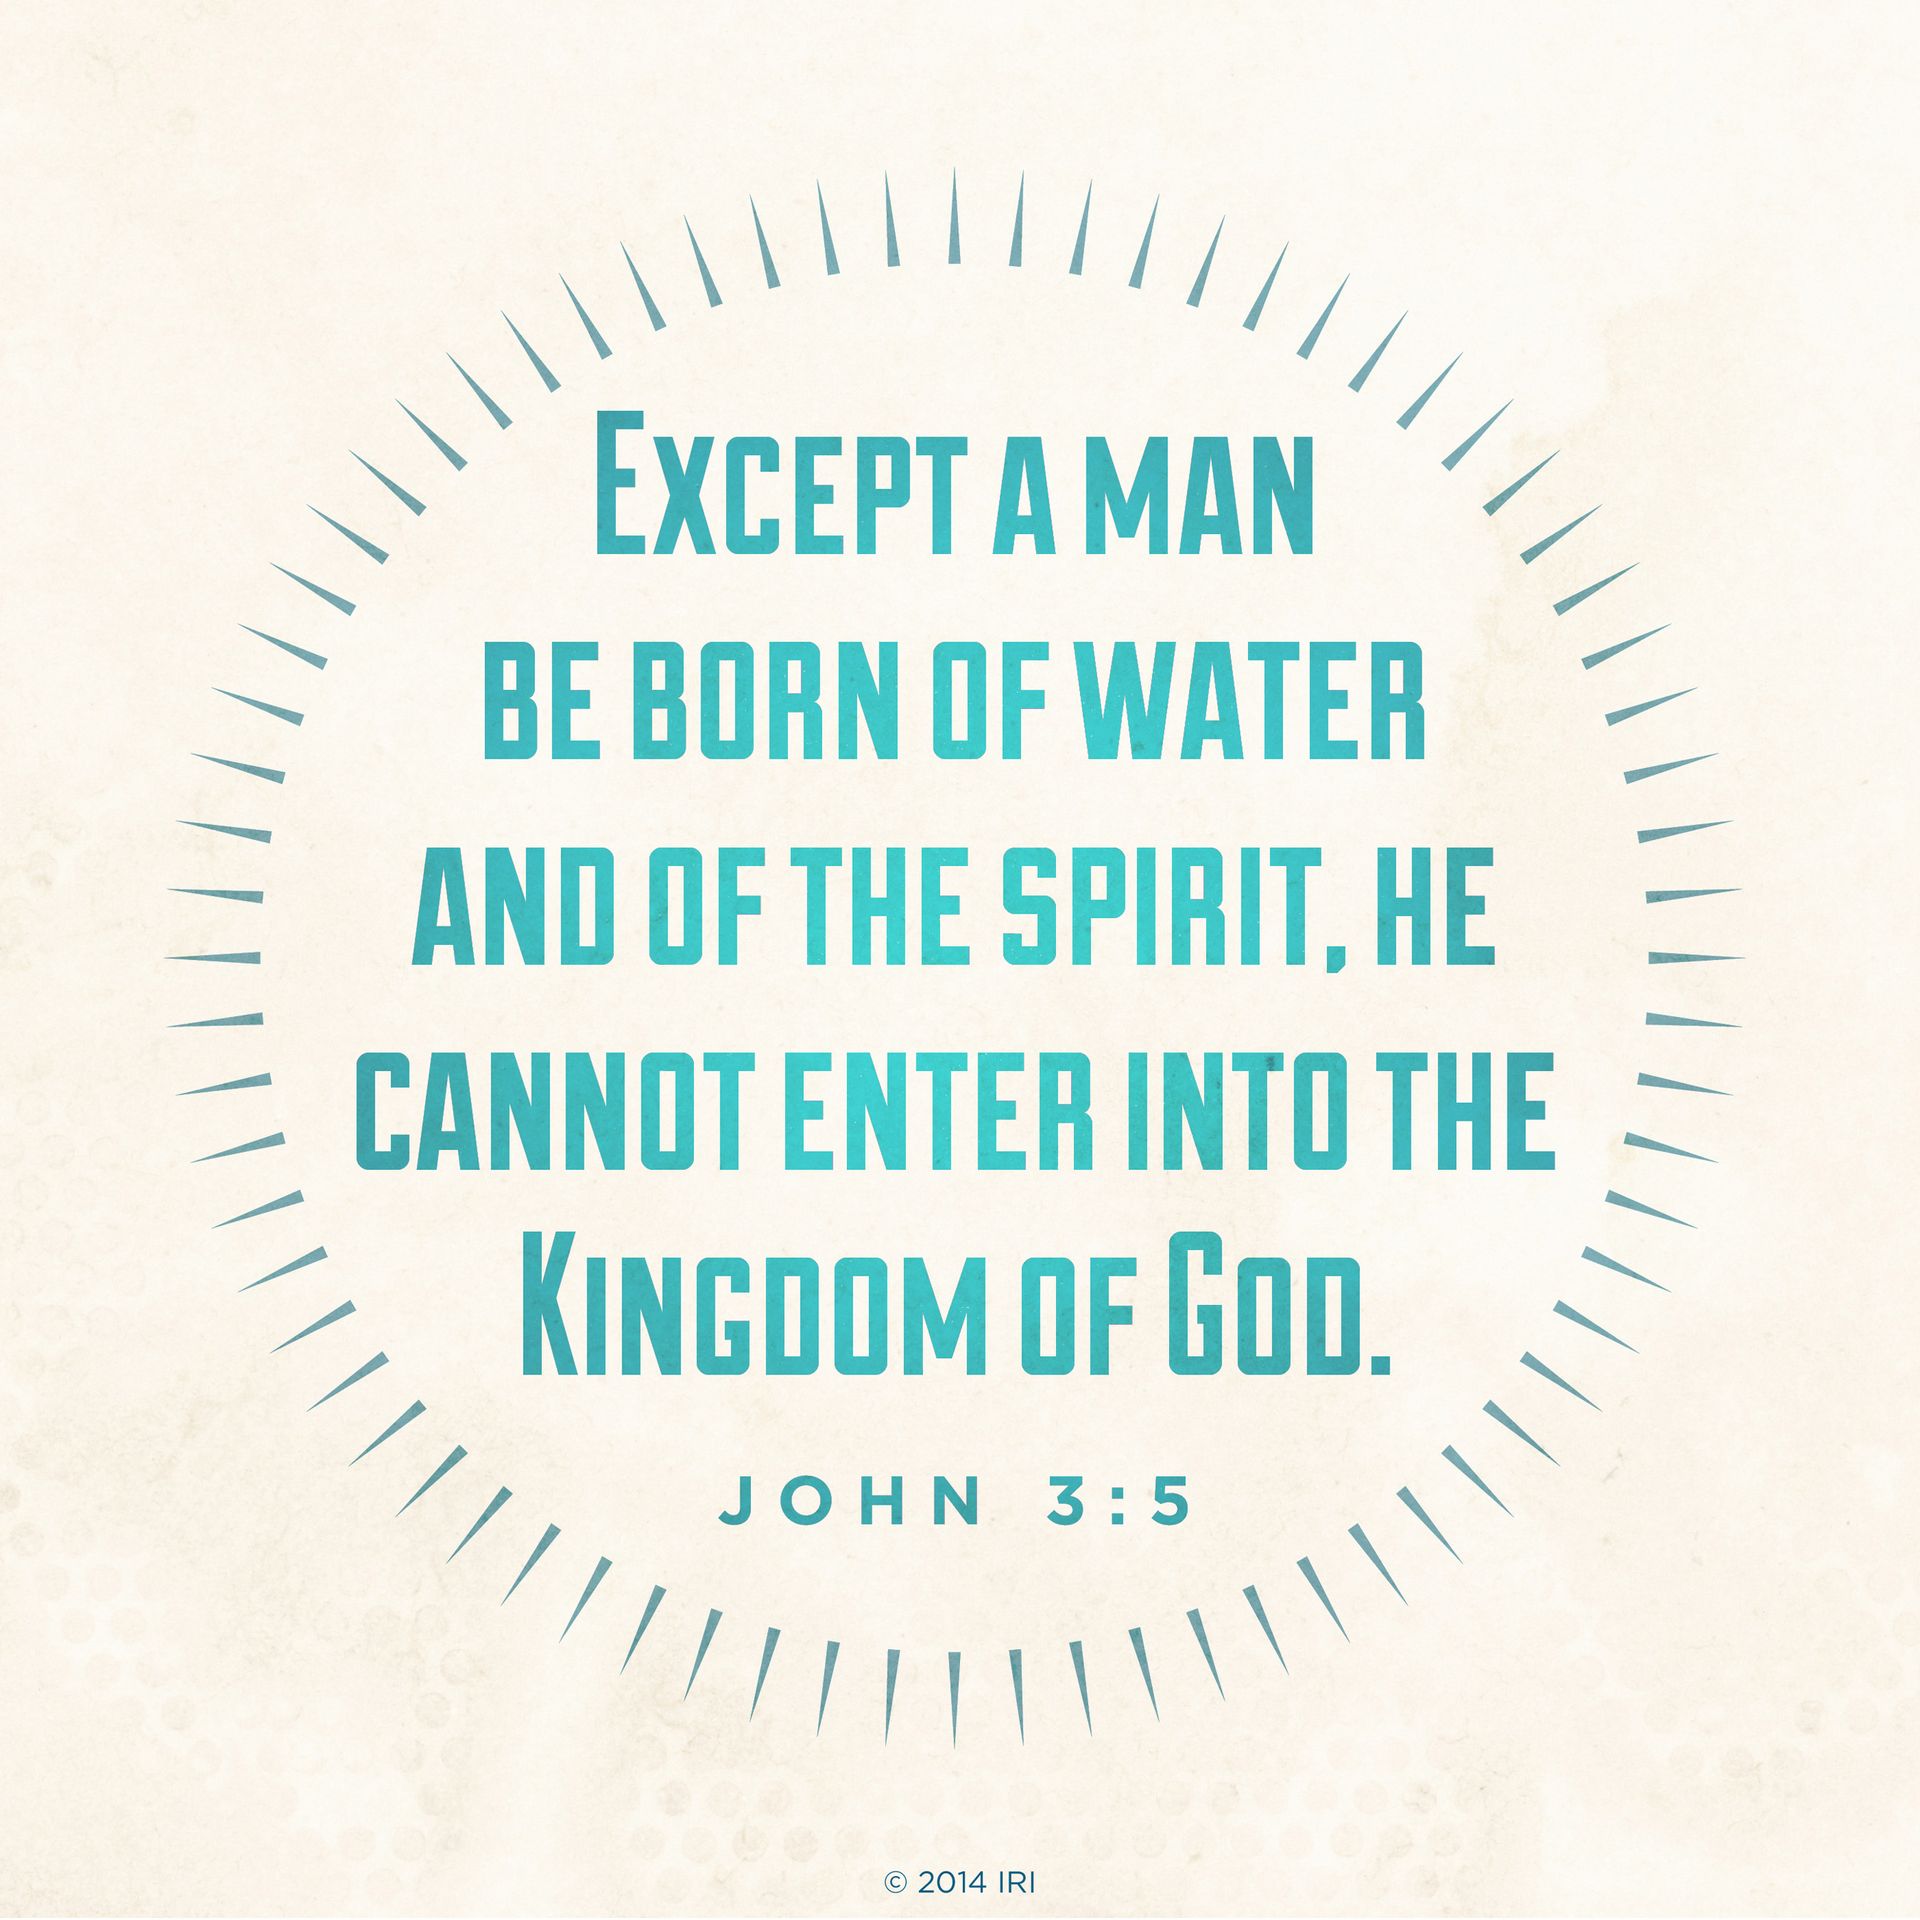 “Except a man be born of water and of the Spirit, he cannot enter into the kingdom of God.” —John 3:5